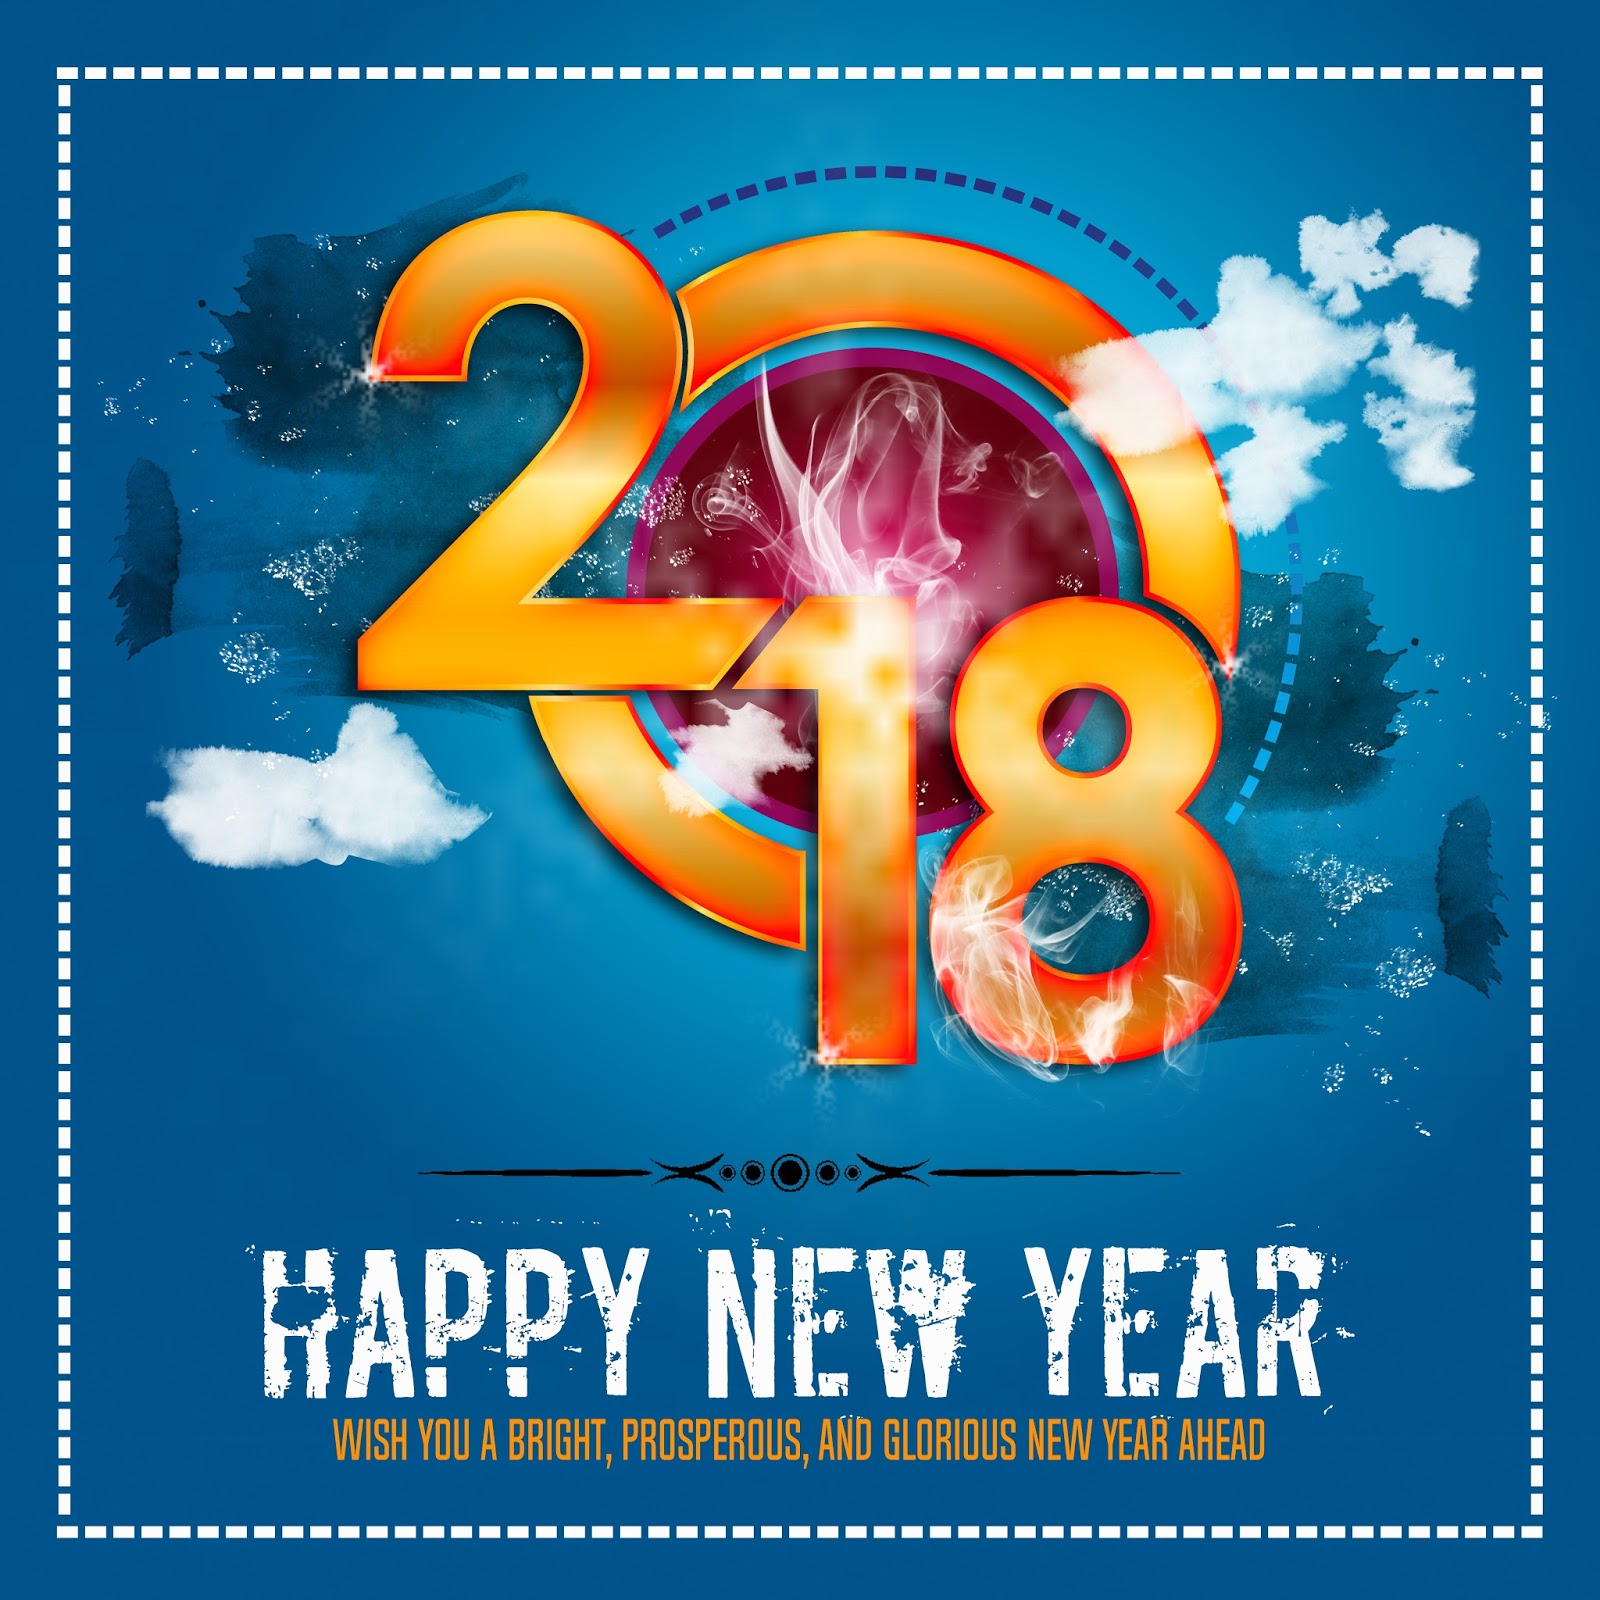 Download 2018 happy new year poster psd template free downloads ...